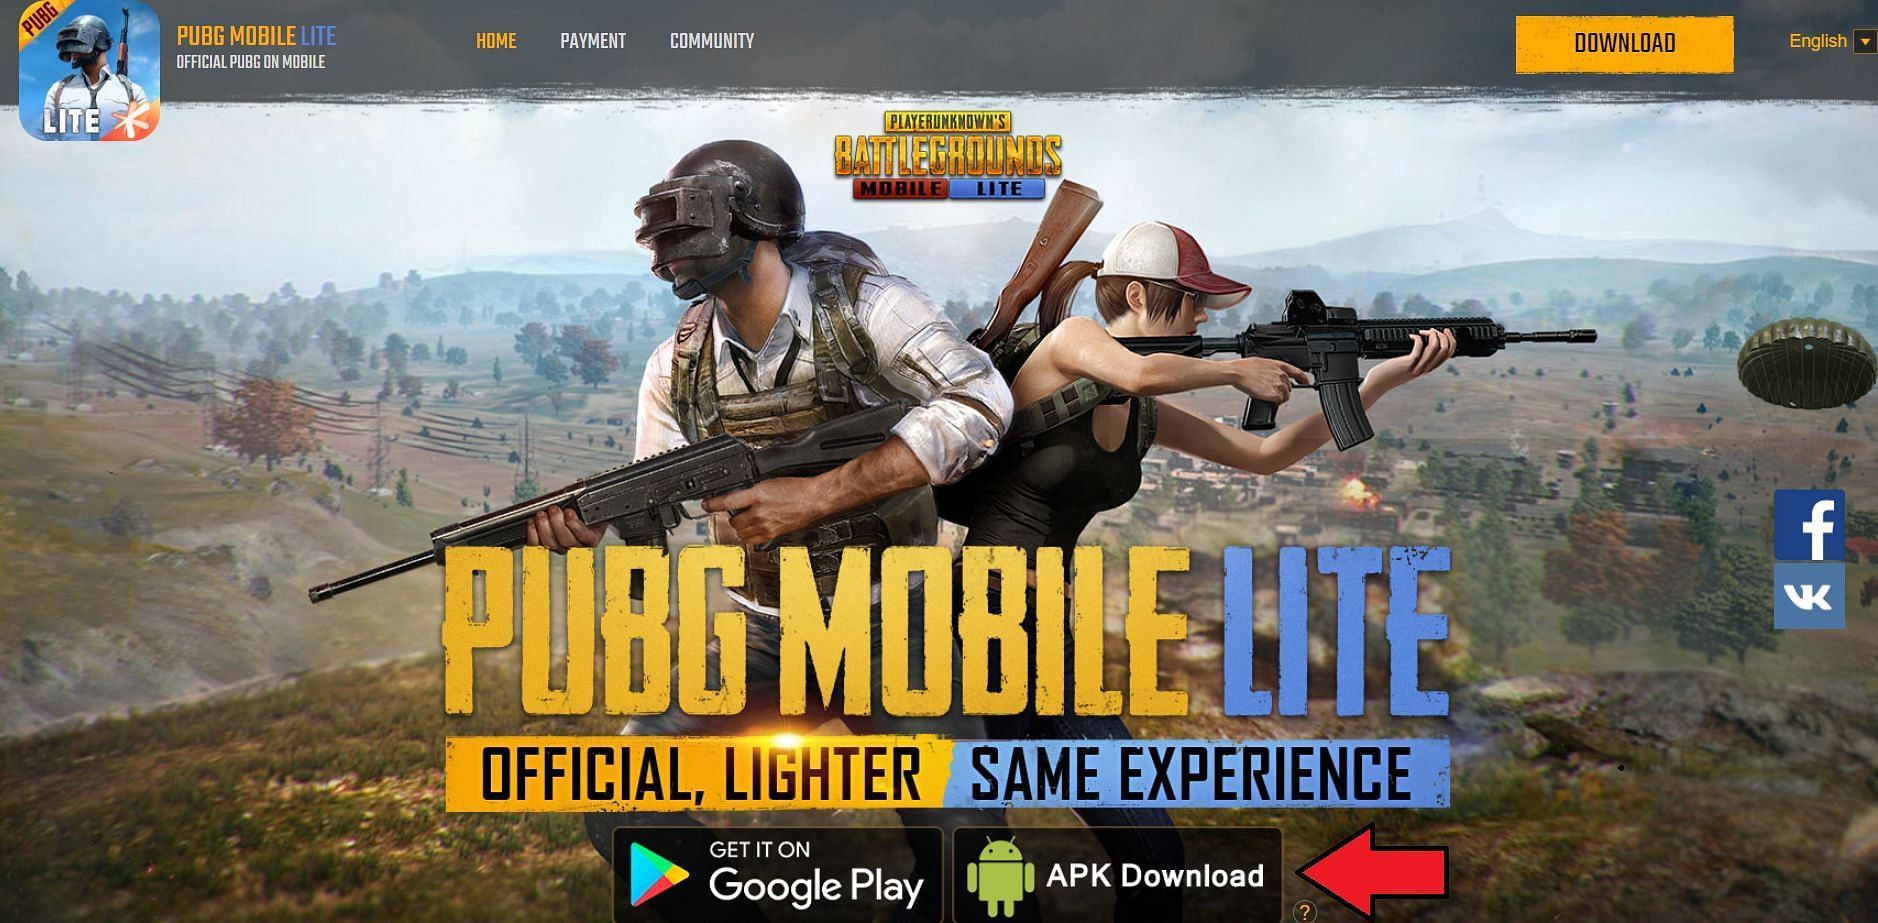 Clicking on this icon will start the download for the APK of version 0.22.0 (Image via PUBG Mobile Lite)